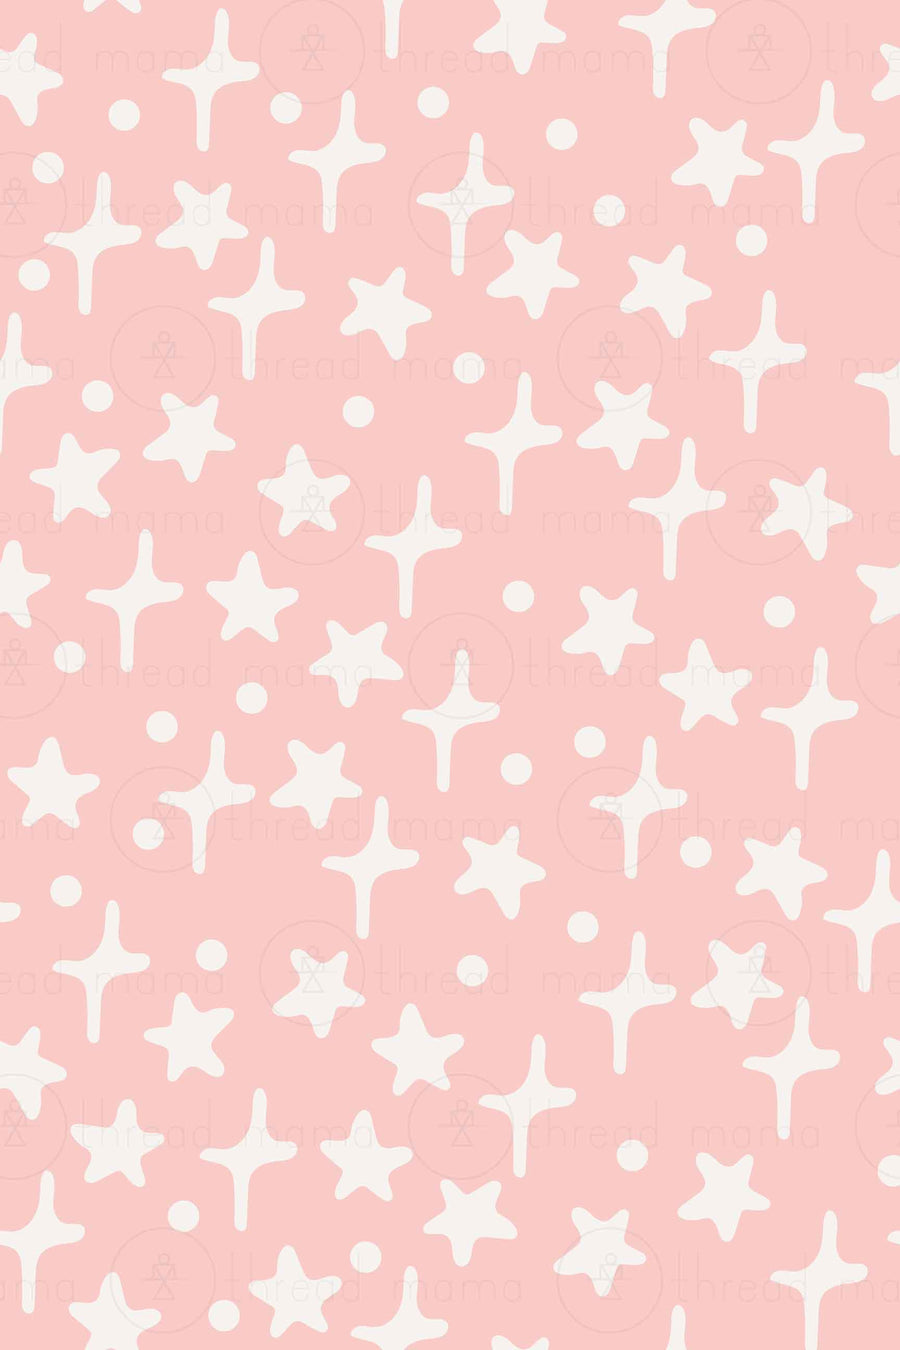 Repeating Pattern 60 (Seamless)